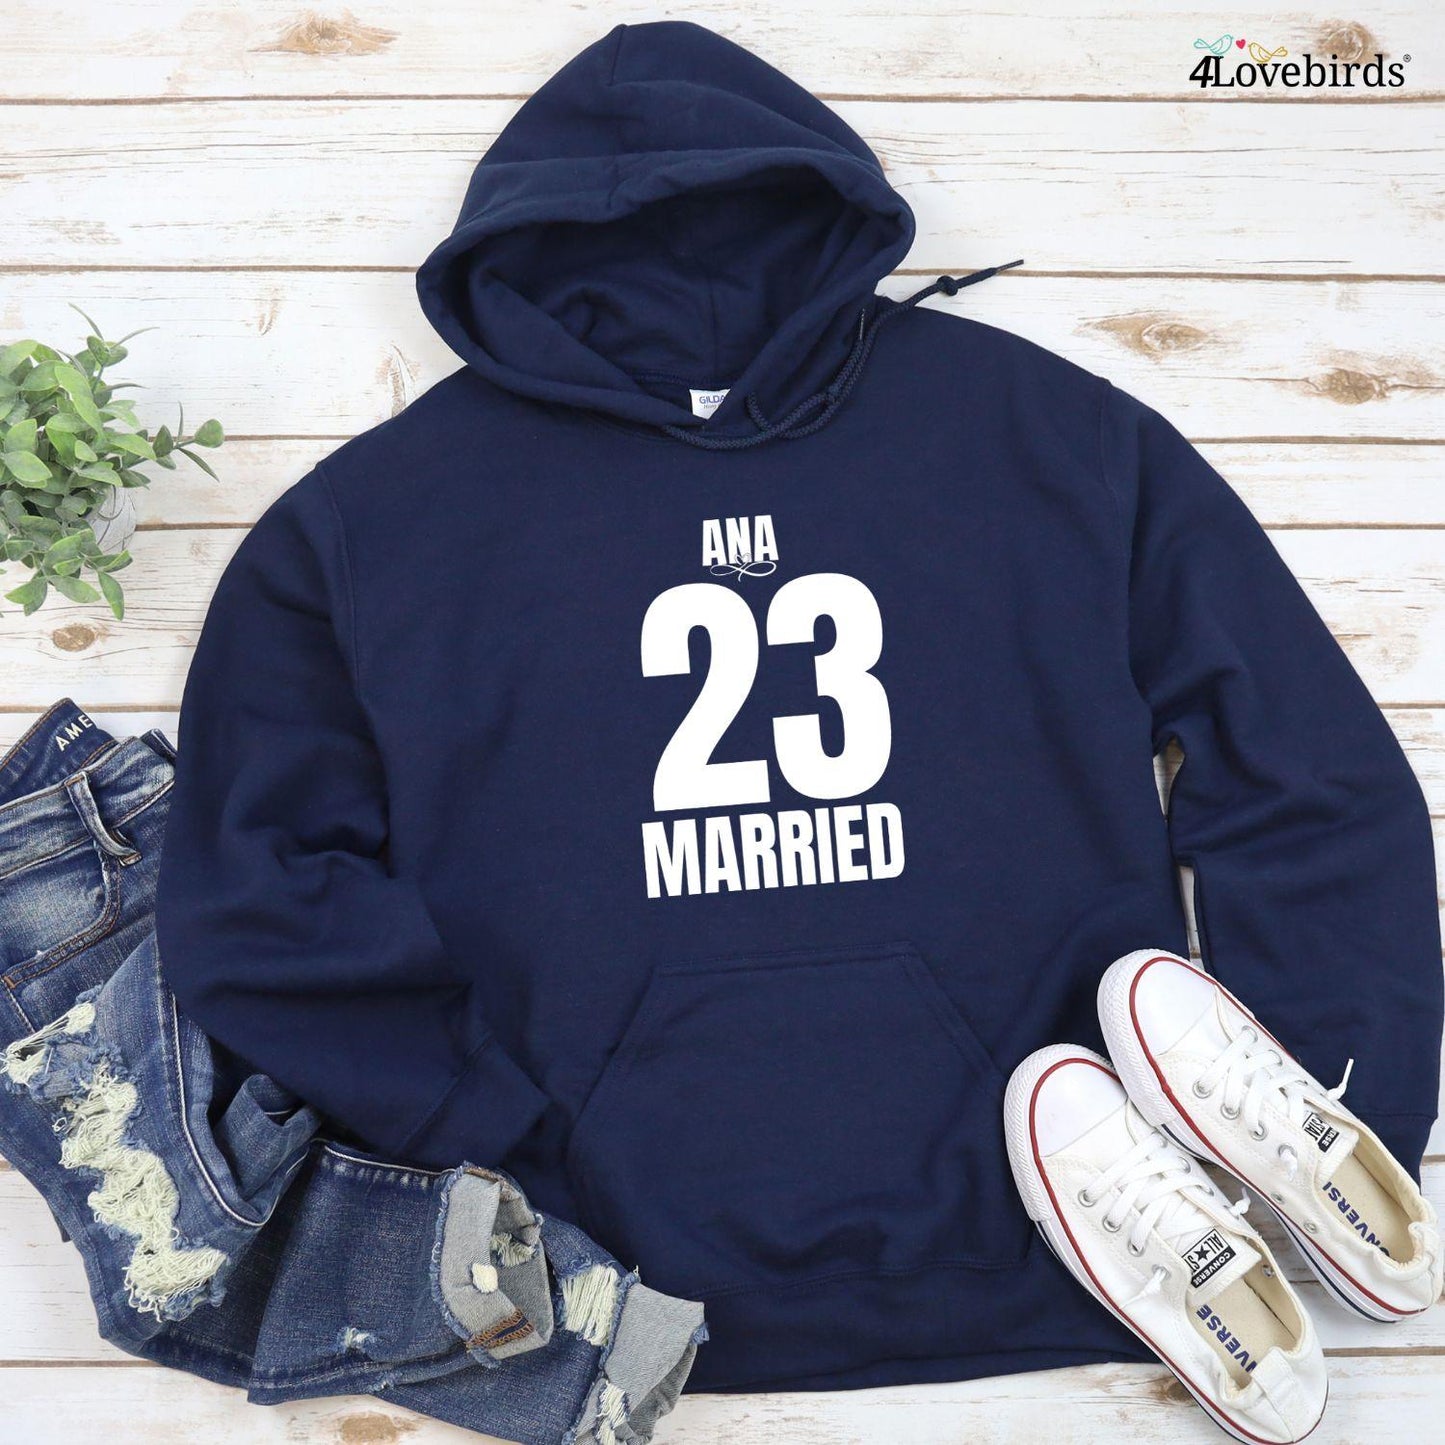 Just Married [Name & Year]: Custom Matching Set for Couples' Celebration Outfits - 4Lovebirds